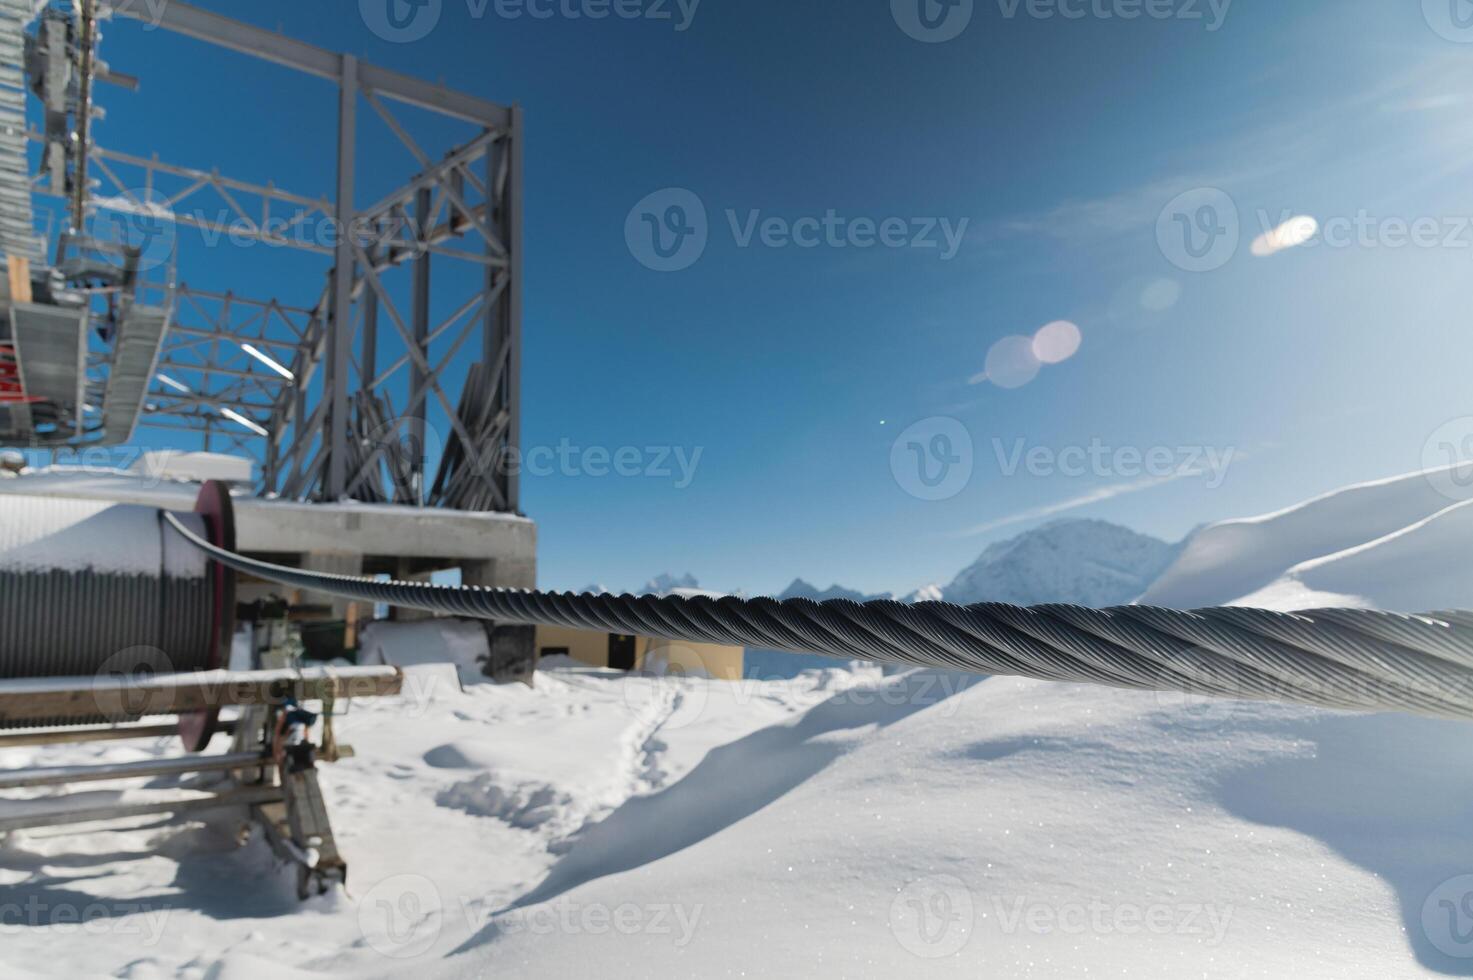 A cable car station high in the mountains under construction. Snowy mountain landscape and construction of a metal structure for a cable car photo